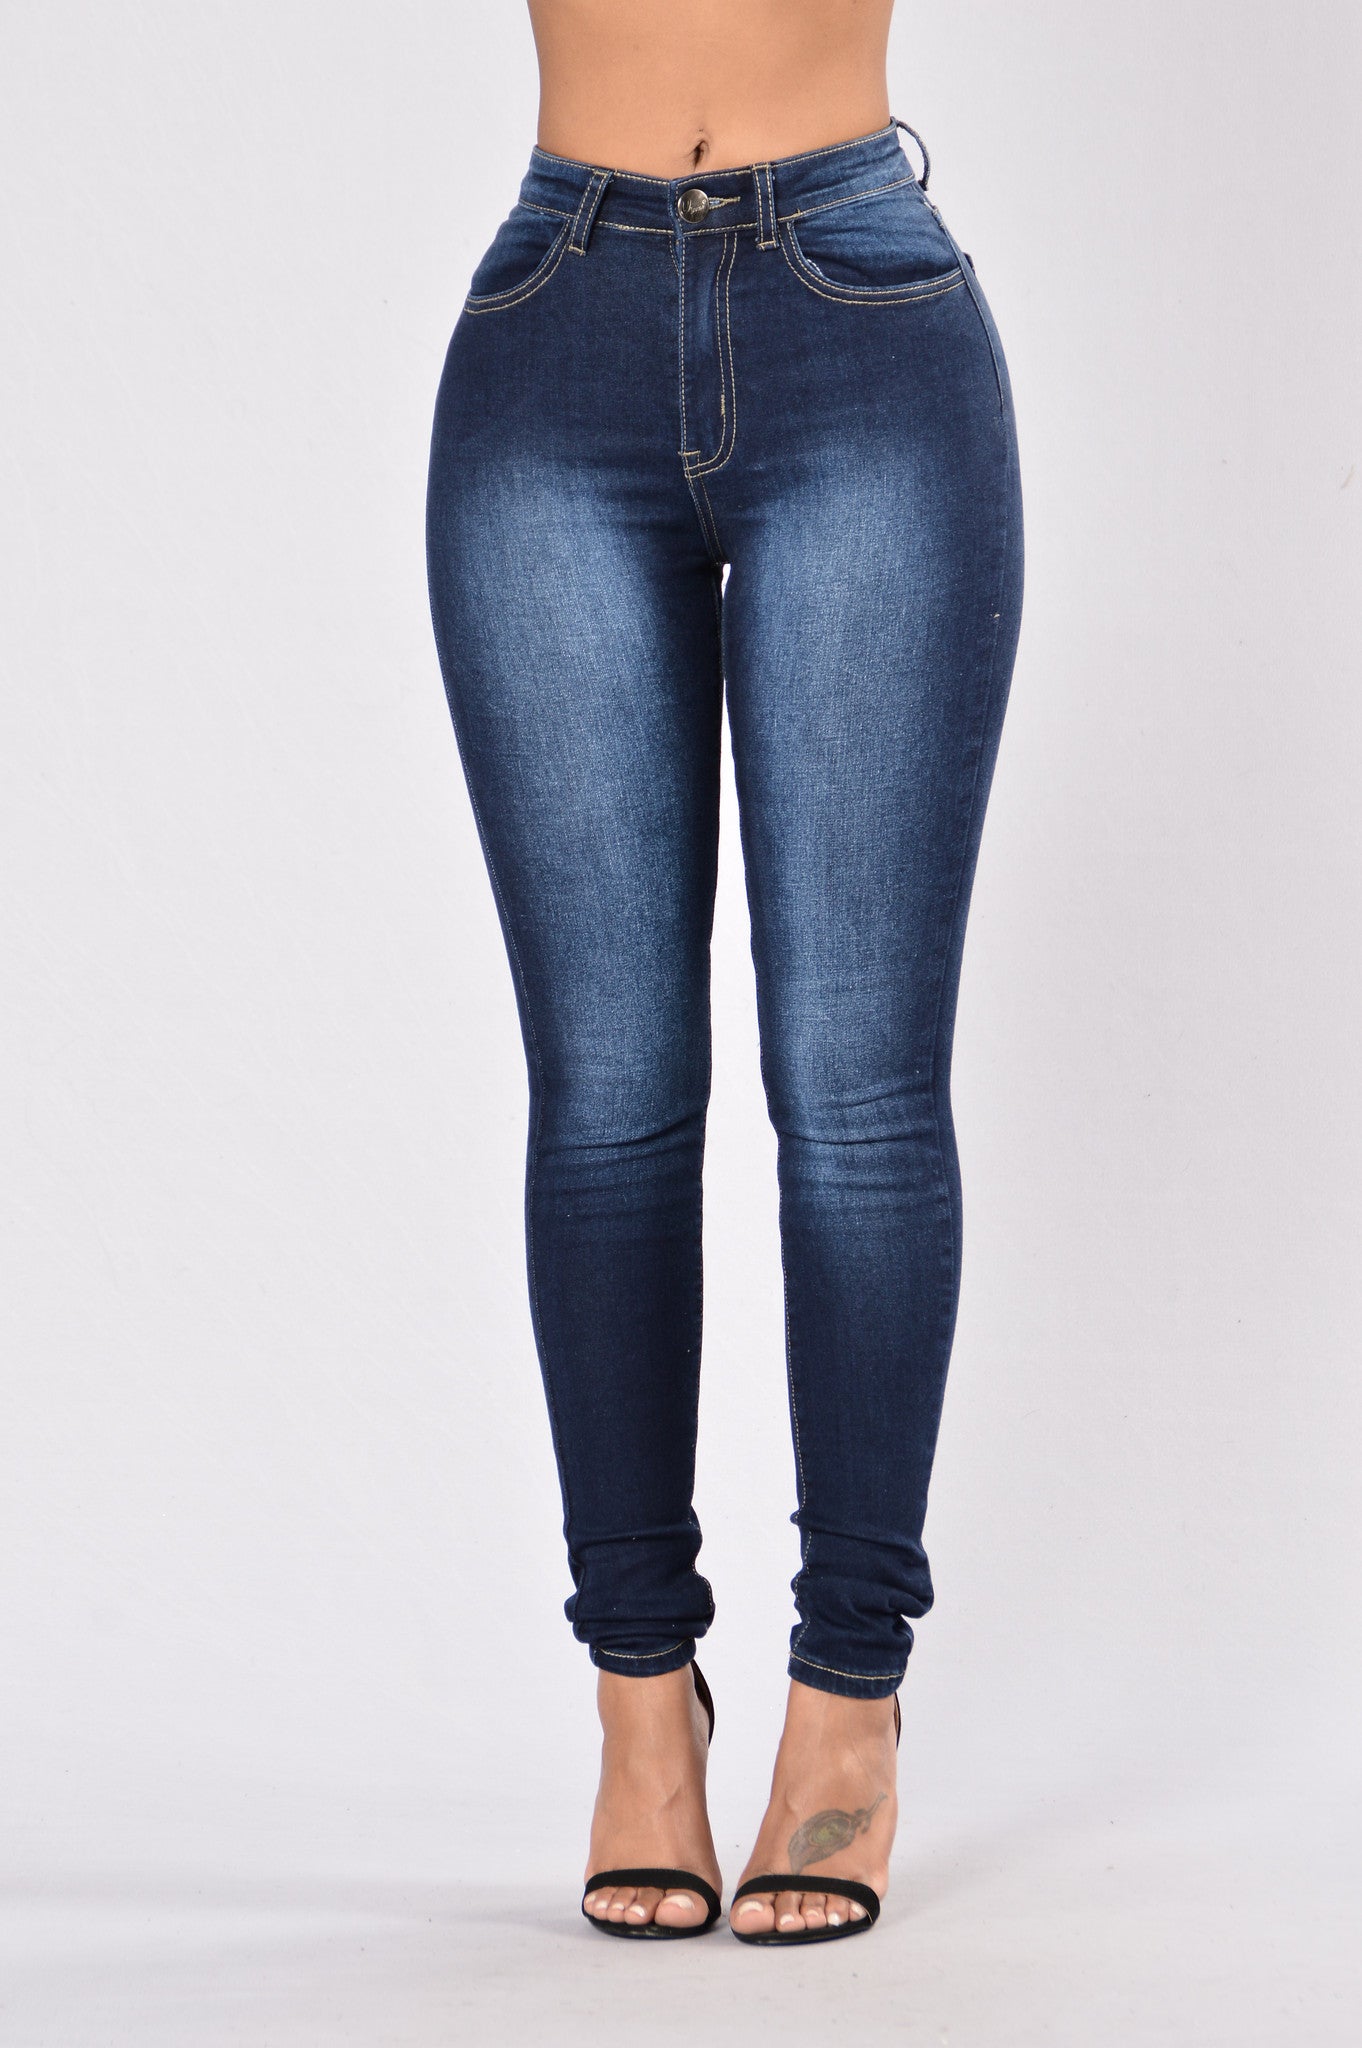 Now and Later High Waist Jean - Dark